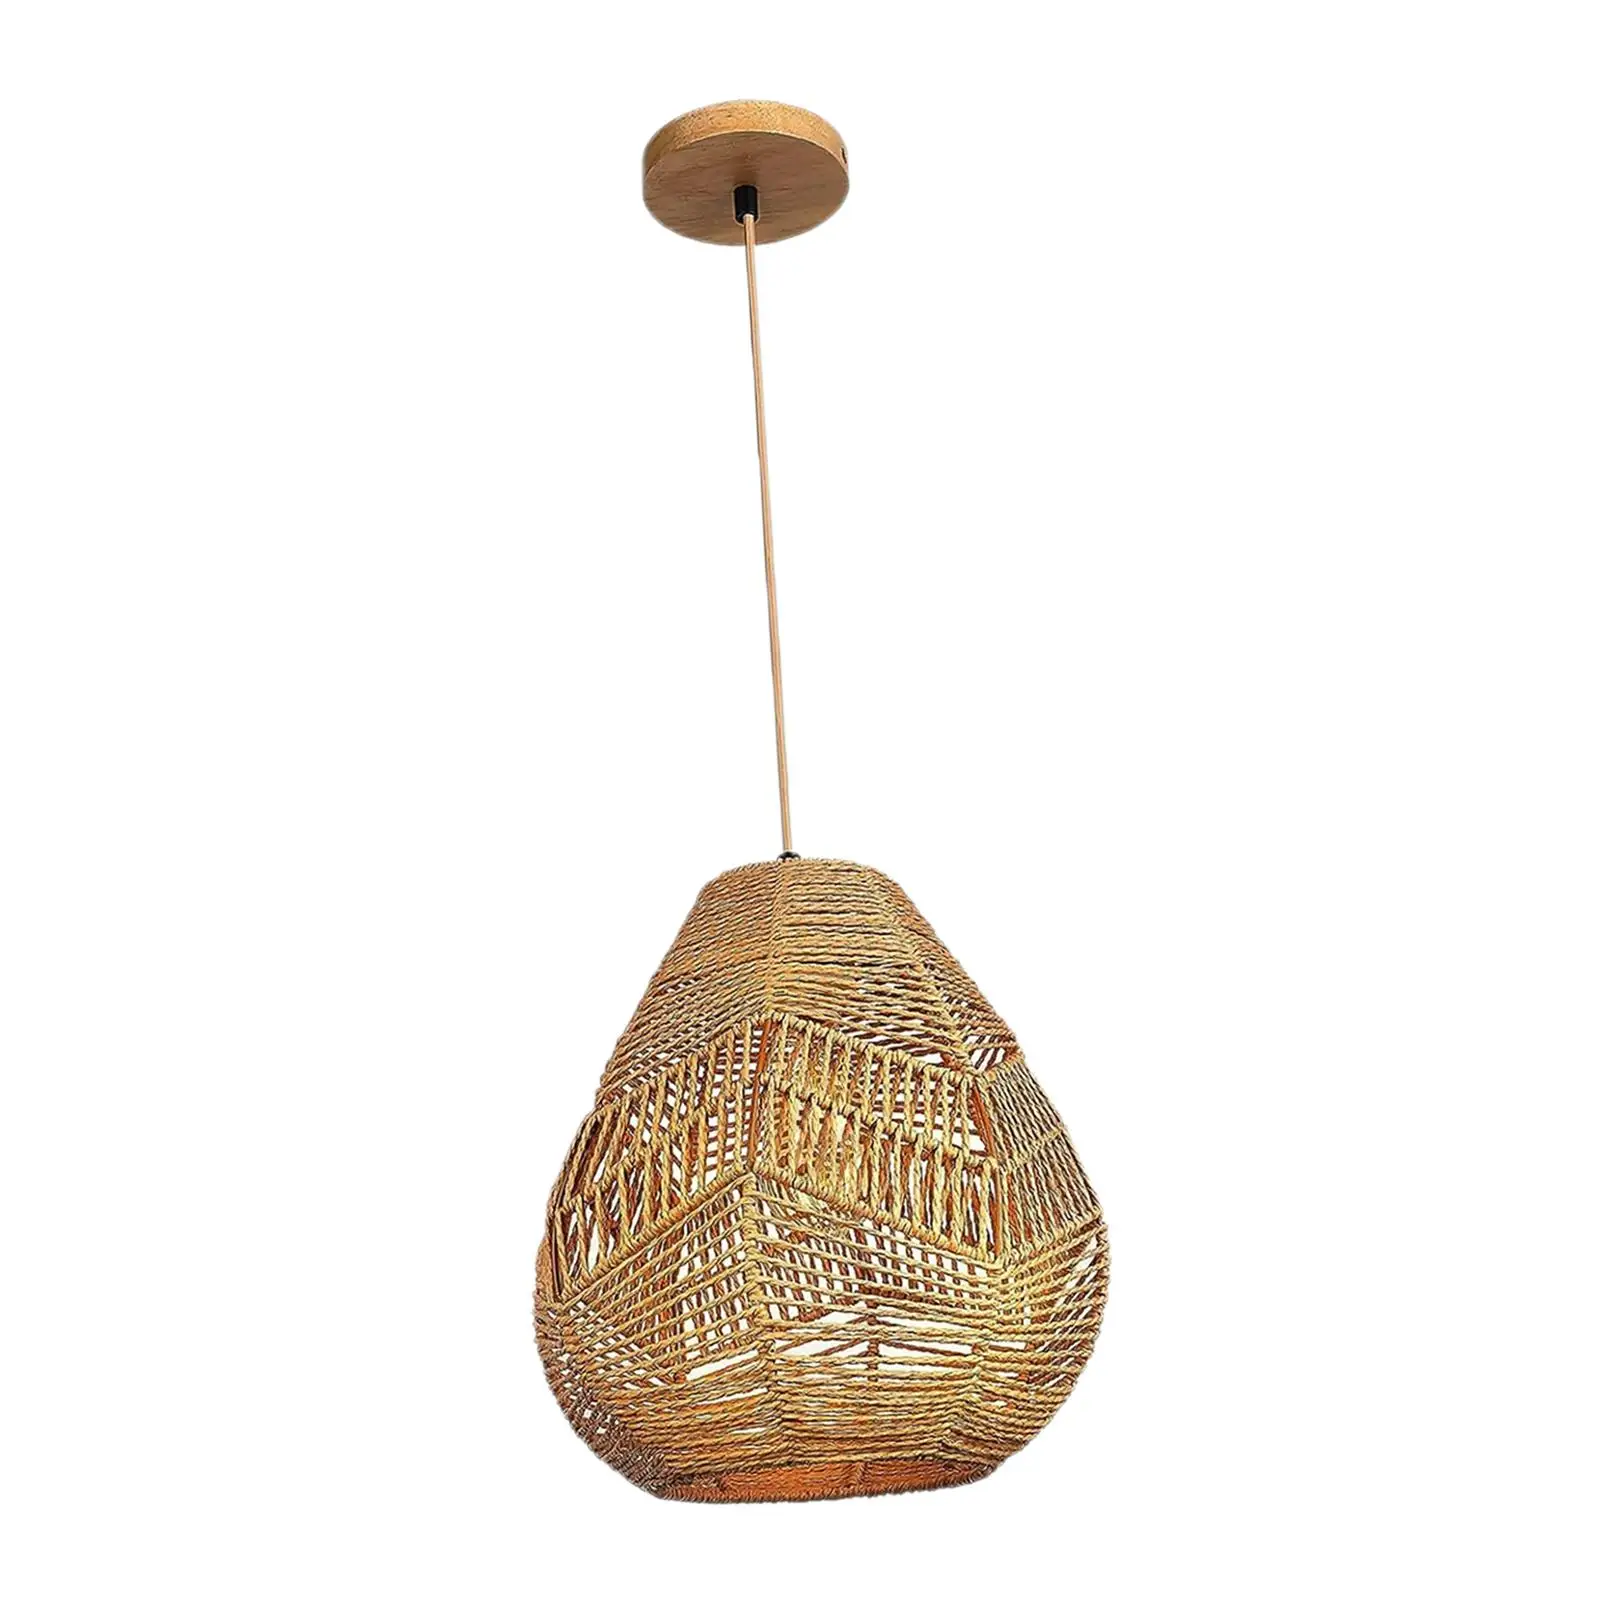 Rope Lampshade Wicker Pendant Light Shade for Wall Sconces Light Fixture Bar